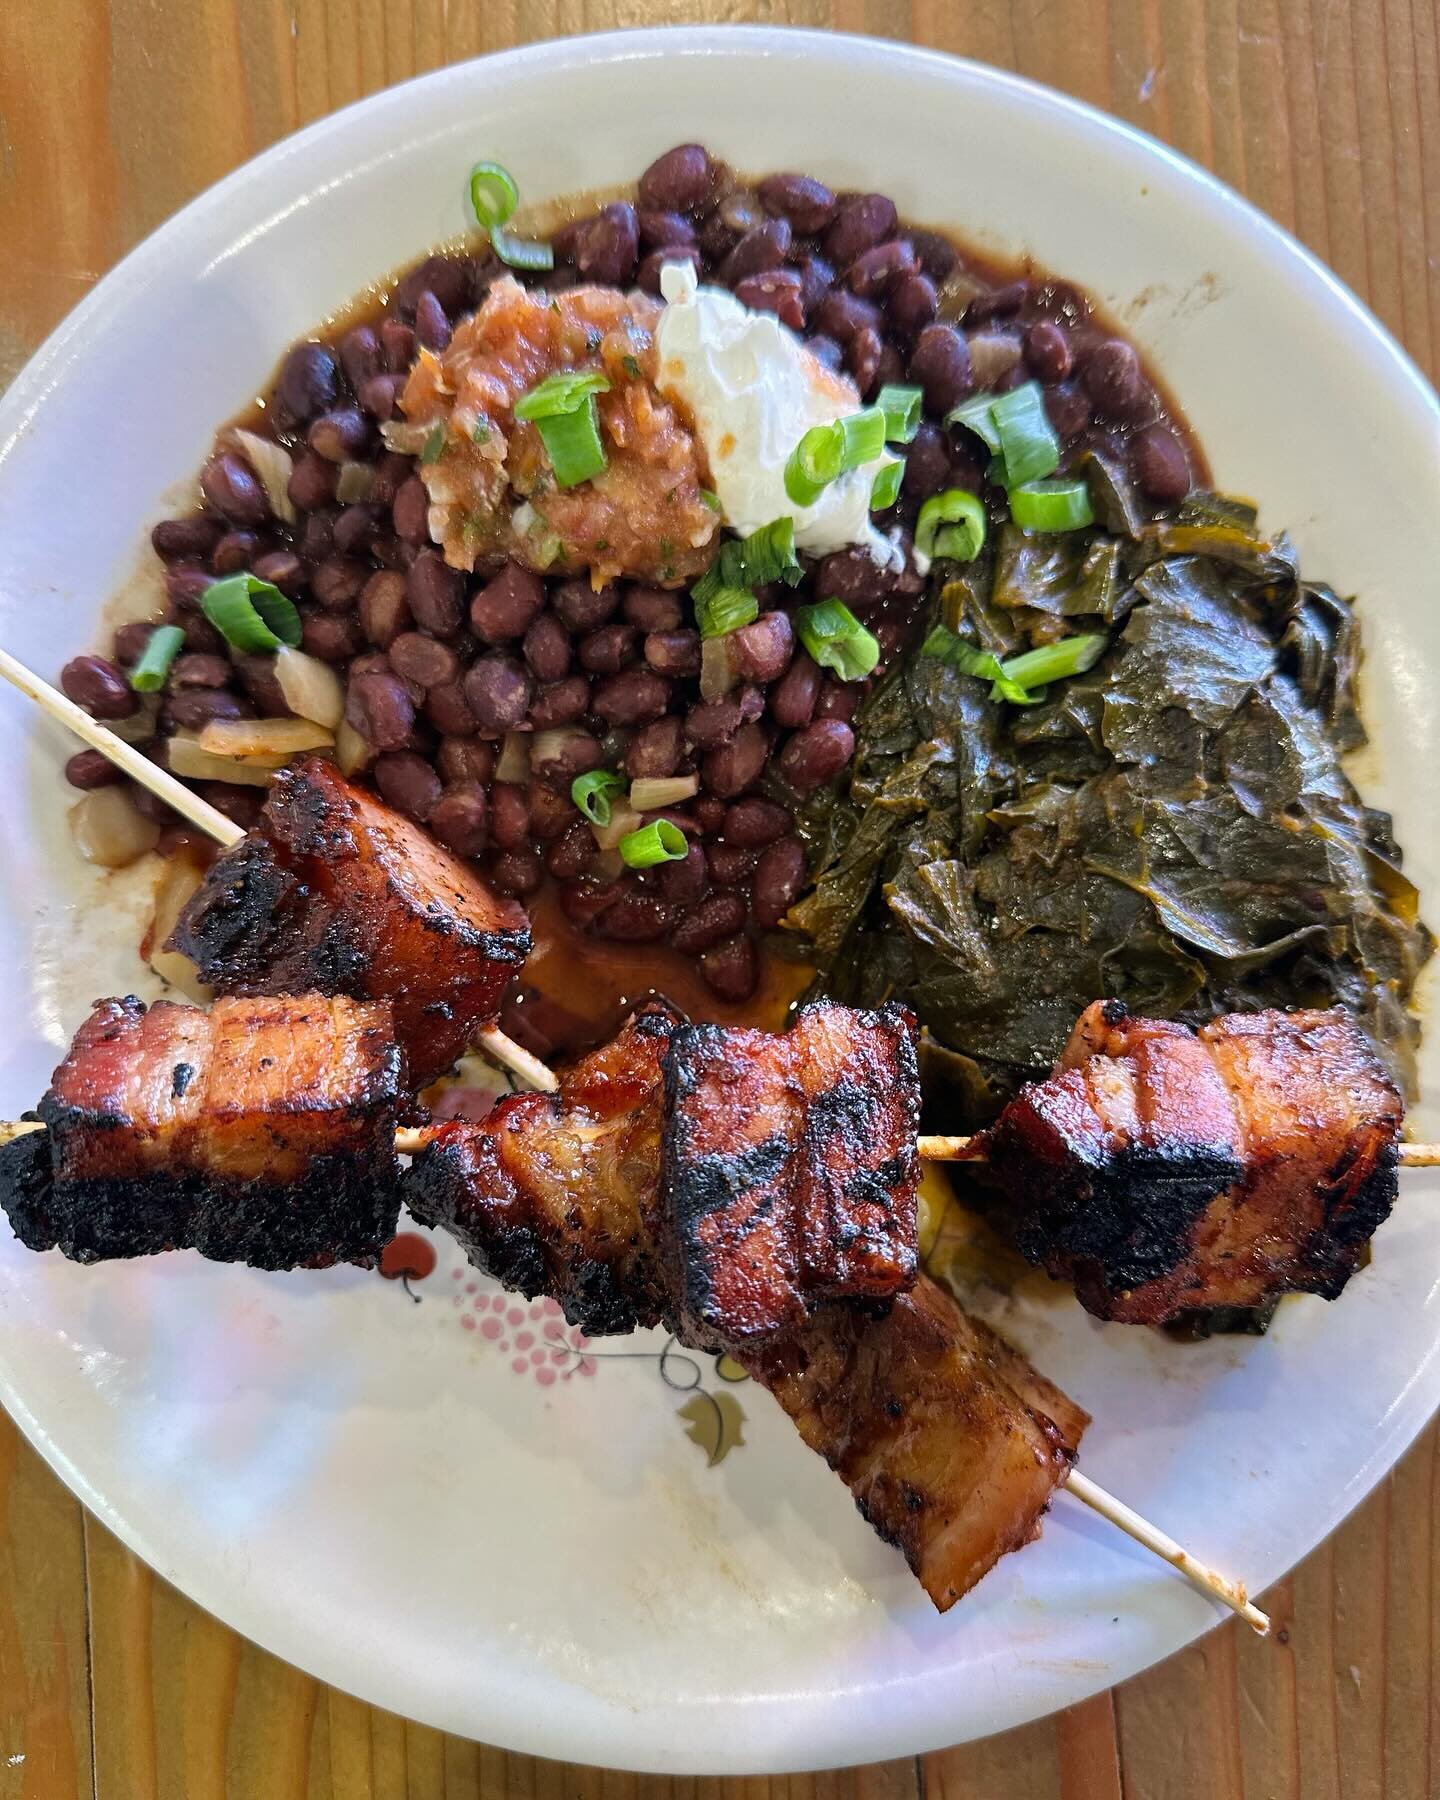 We&rsquo;re firing it up for Friday! And by &ldquo;it,&rdquo; we mean our live fire grill. Tonight&rsquo;s special is grilled pork belly skewers with collards and Cuban-style black beans. 🔥🔥🔥 Our cocktail preview is Strawberry Fields: Muddy River 